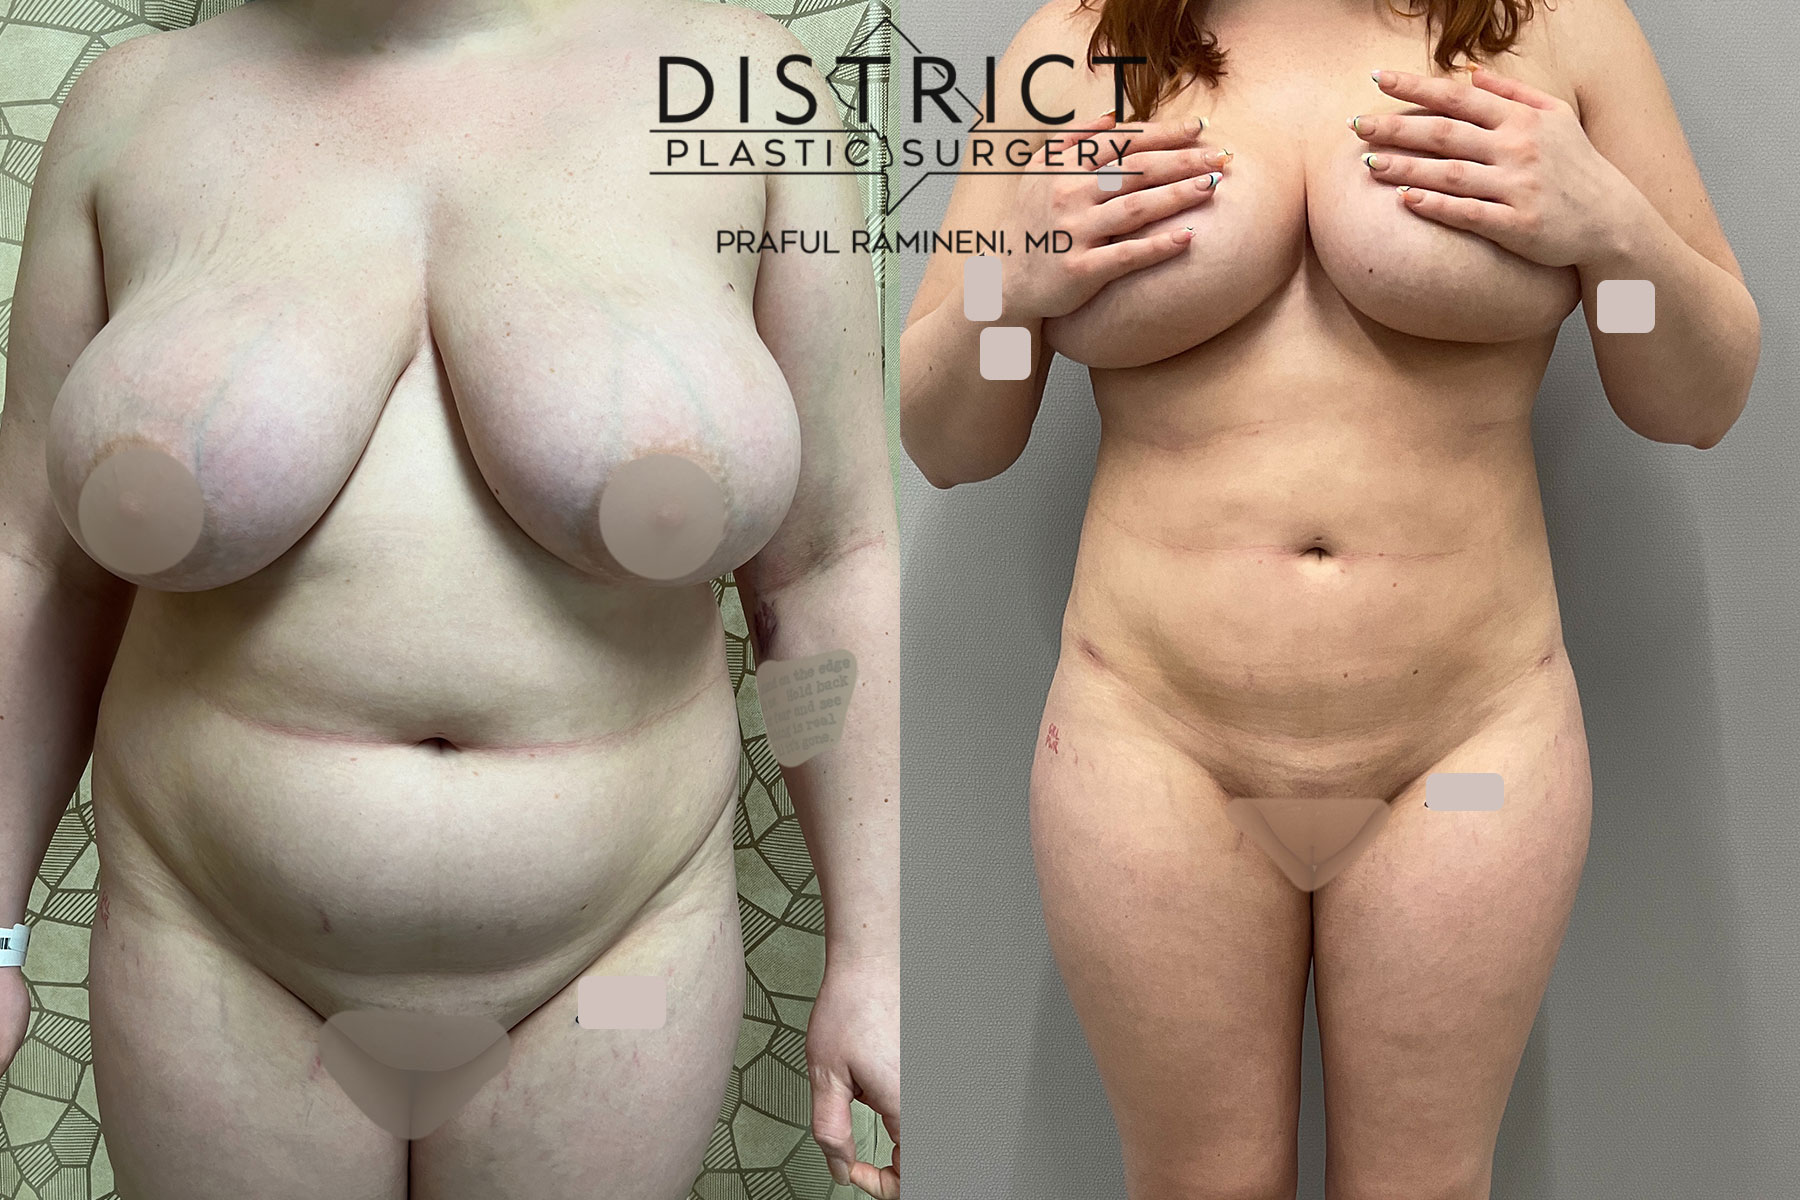 Large Volume Liposuction Before and After Photo by District Plastic Surgery in Washington, DC